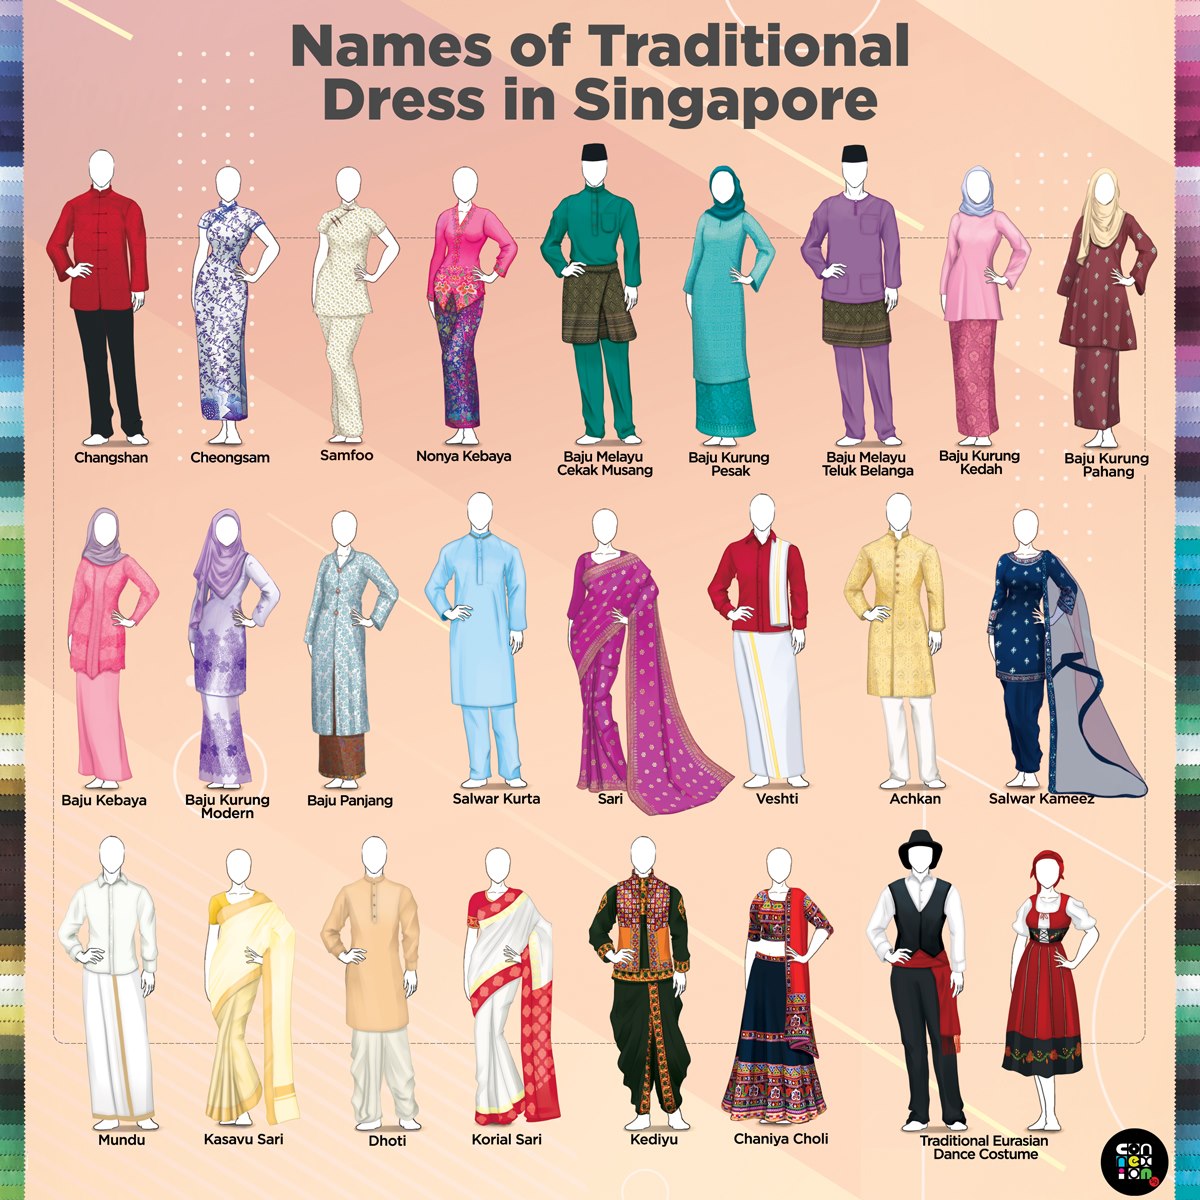 Names of Traditional Dress in Singapore